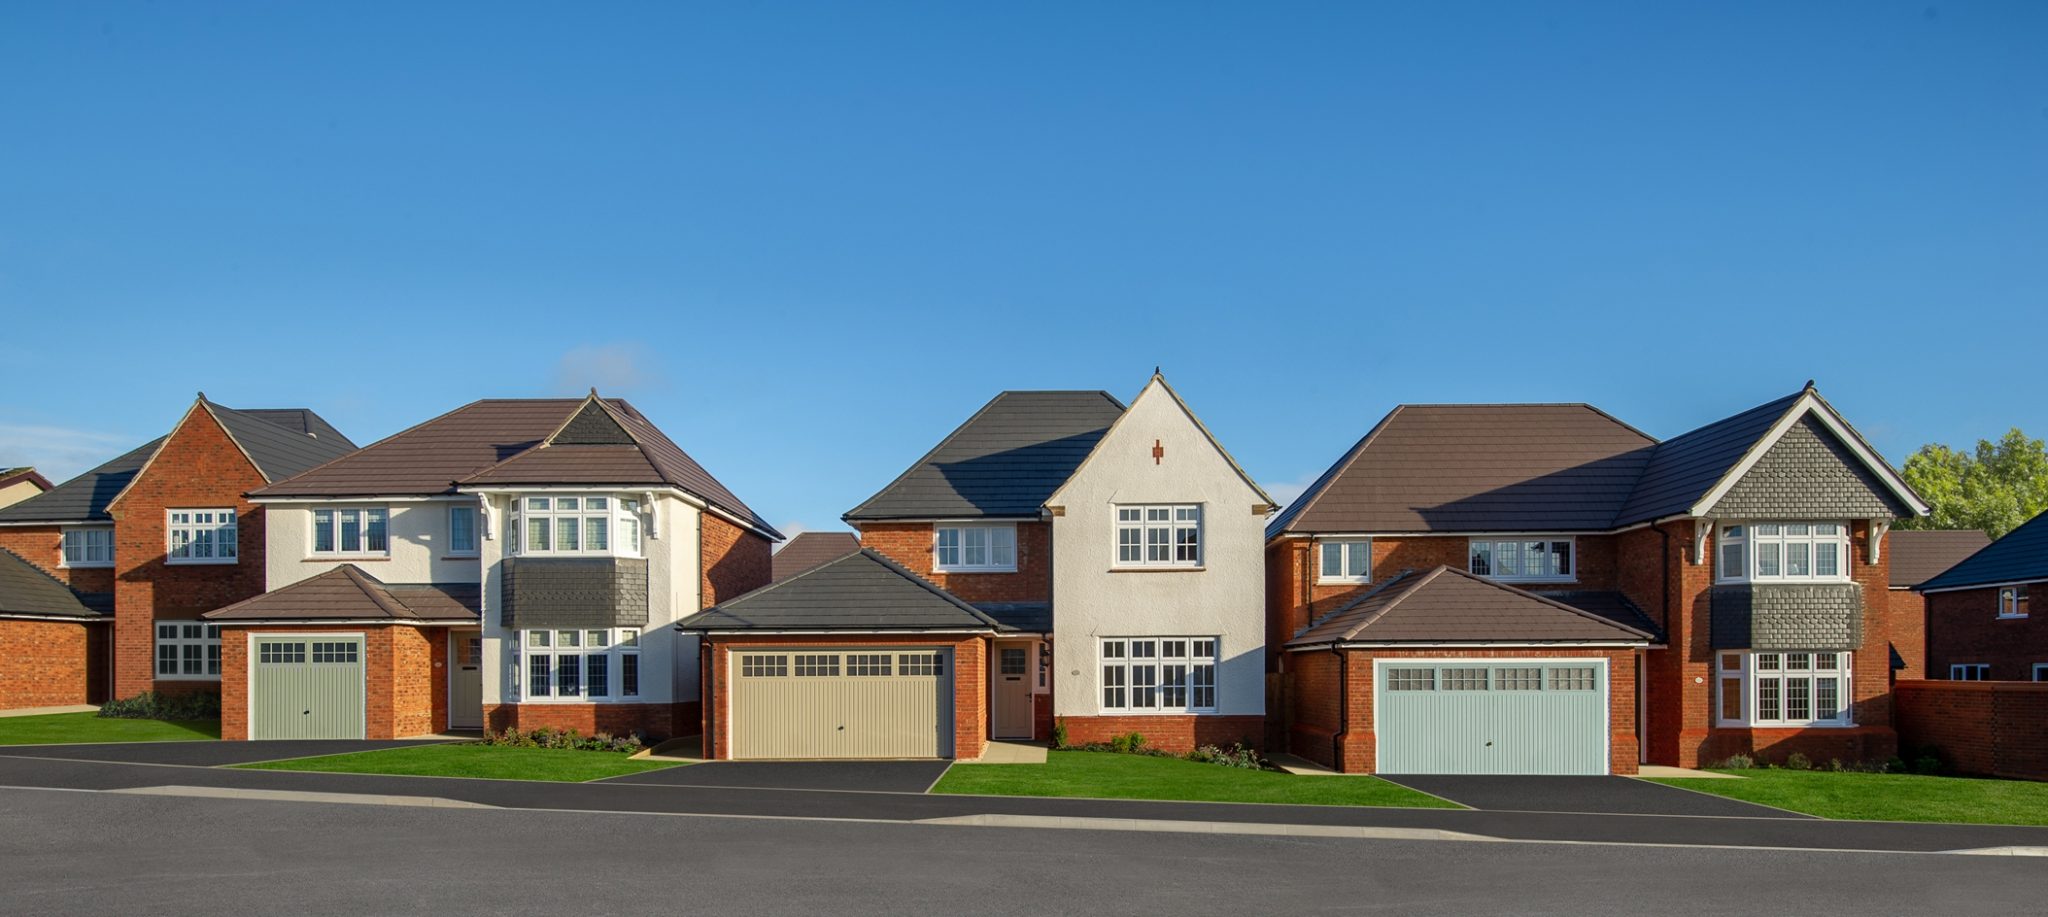 Redrow launches online reservation to enhance customer journey @Redrowplc @RedrowHomes